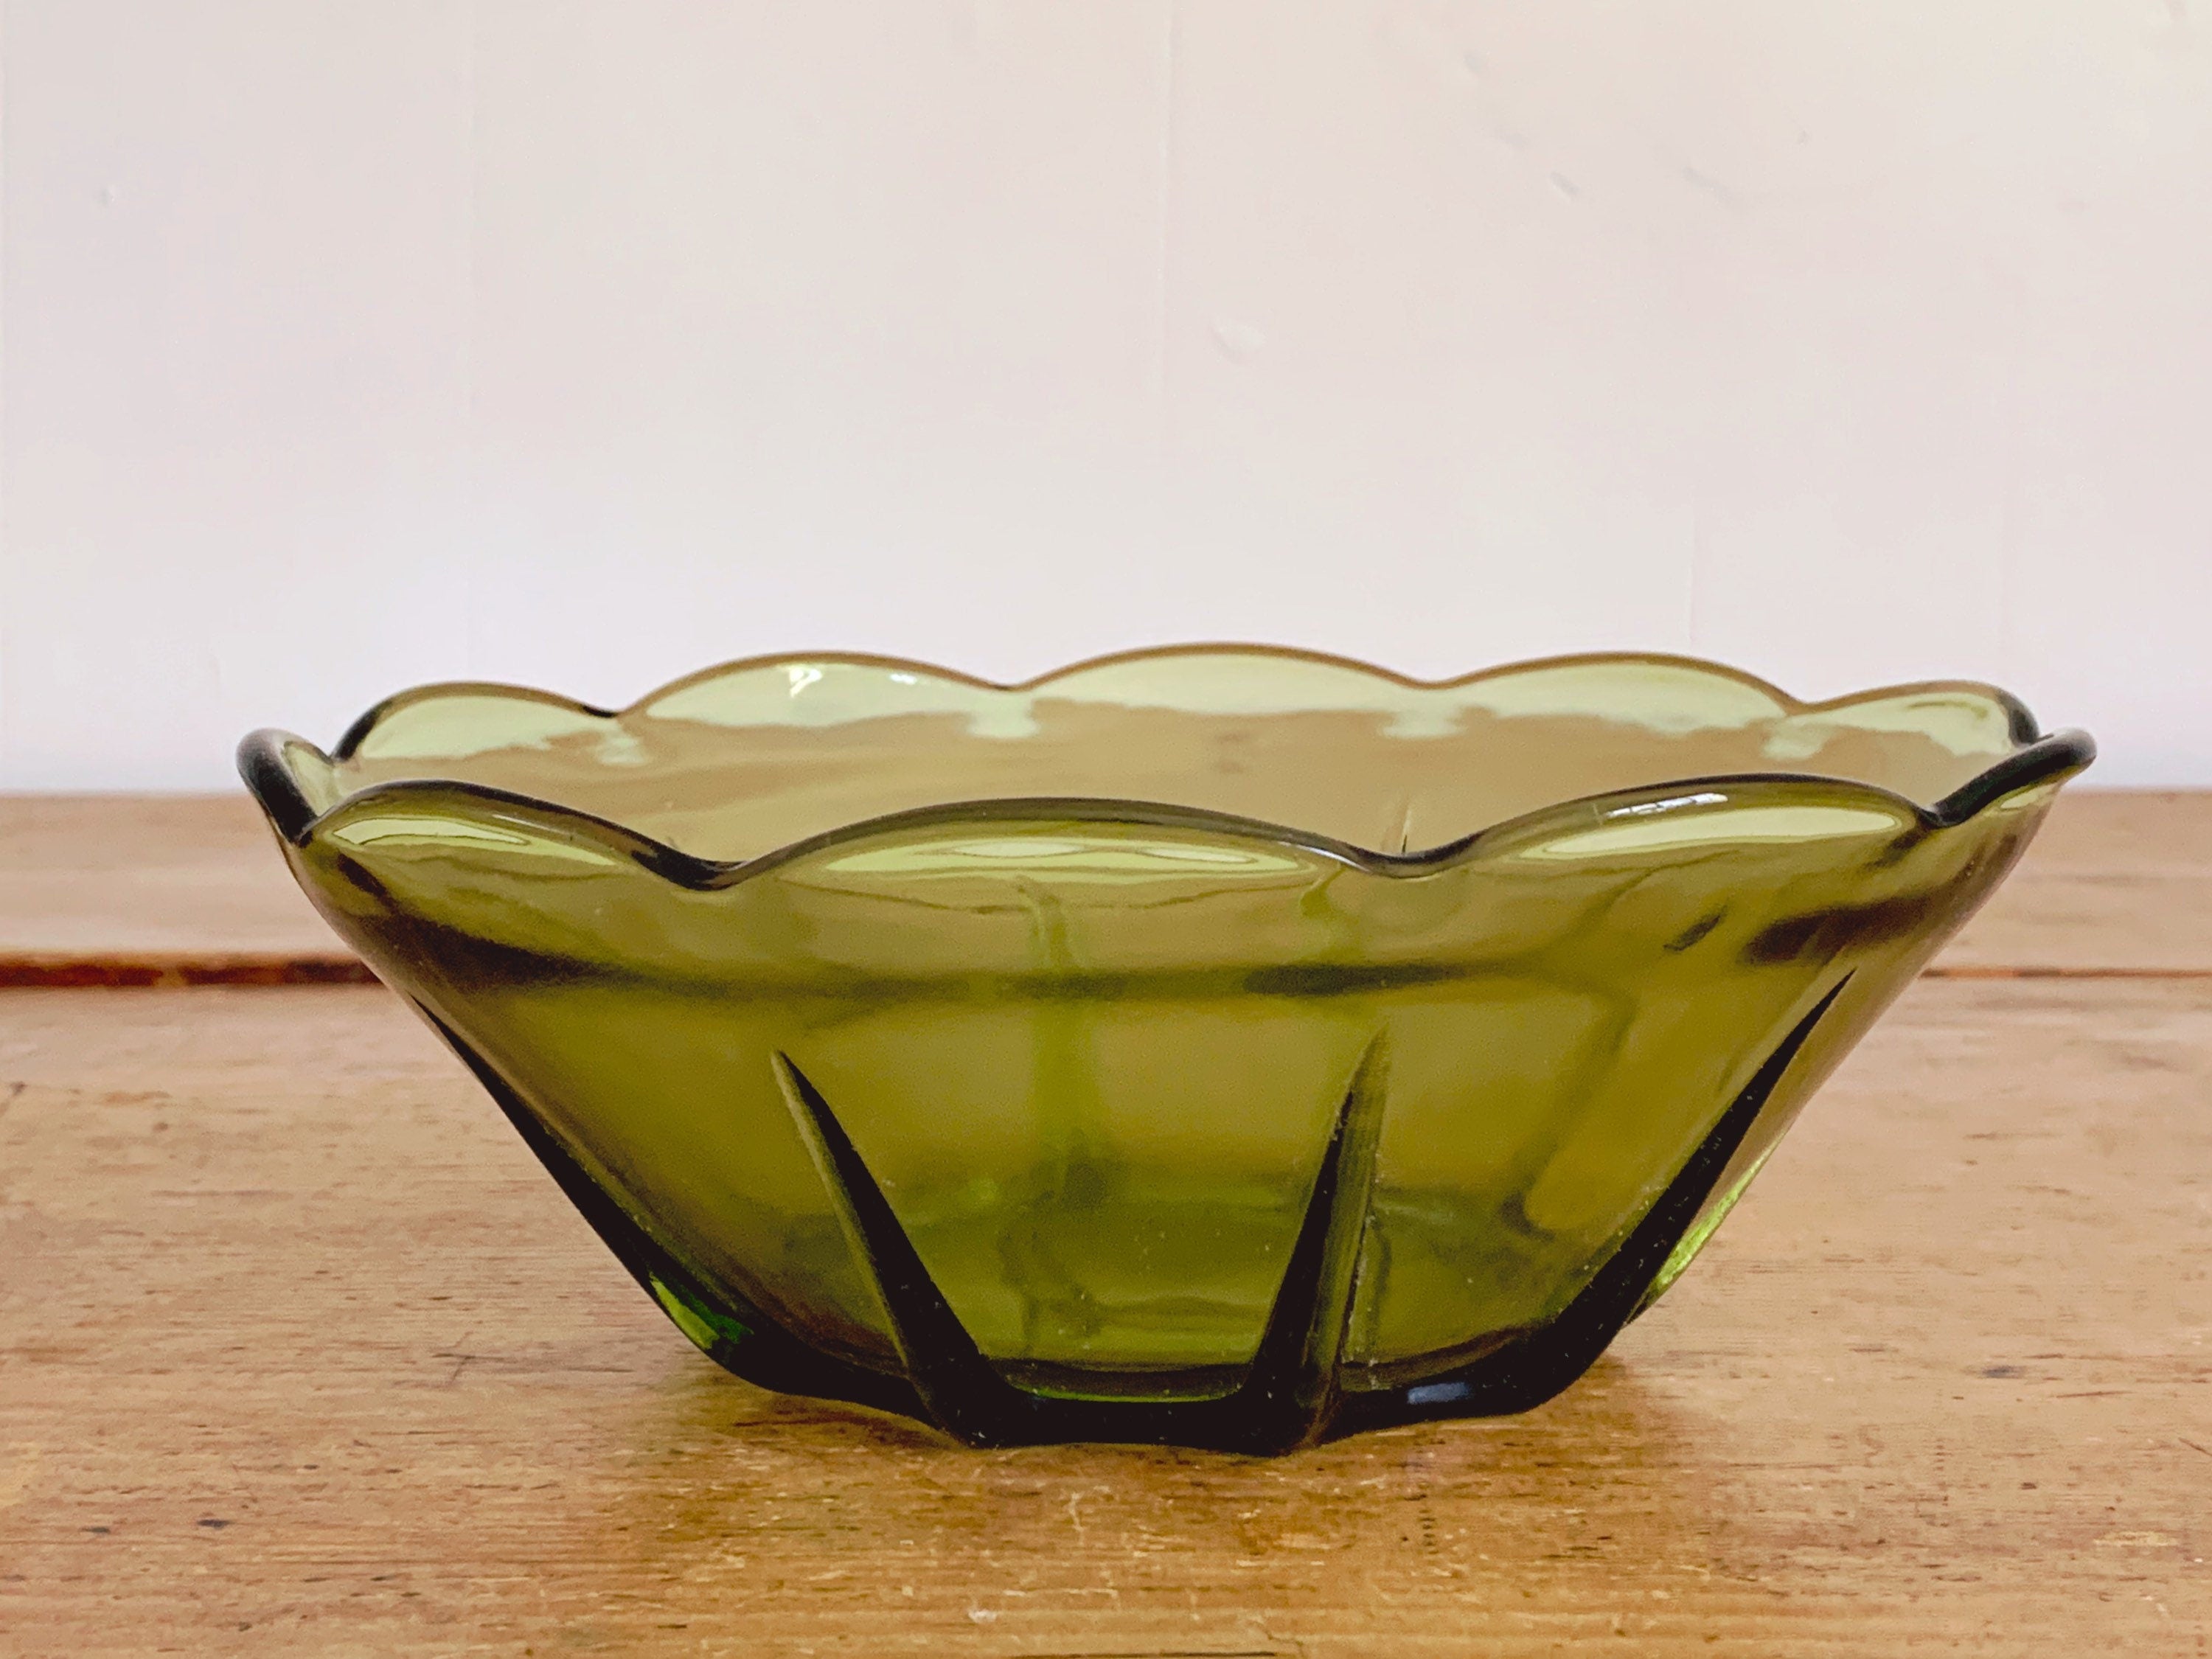 Vintage Mid Century Olive Green Glass Serving Bowl with Scalloped Edges | Tableware Jewelry Dish Catchall Bowl | Mother's Day Gift